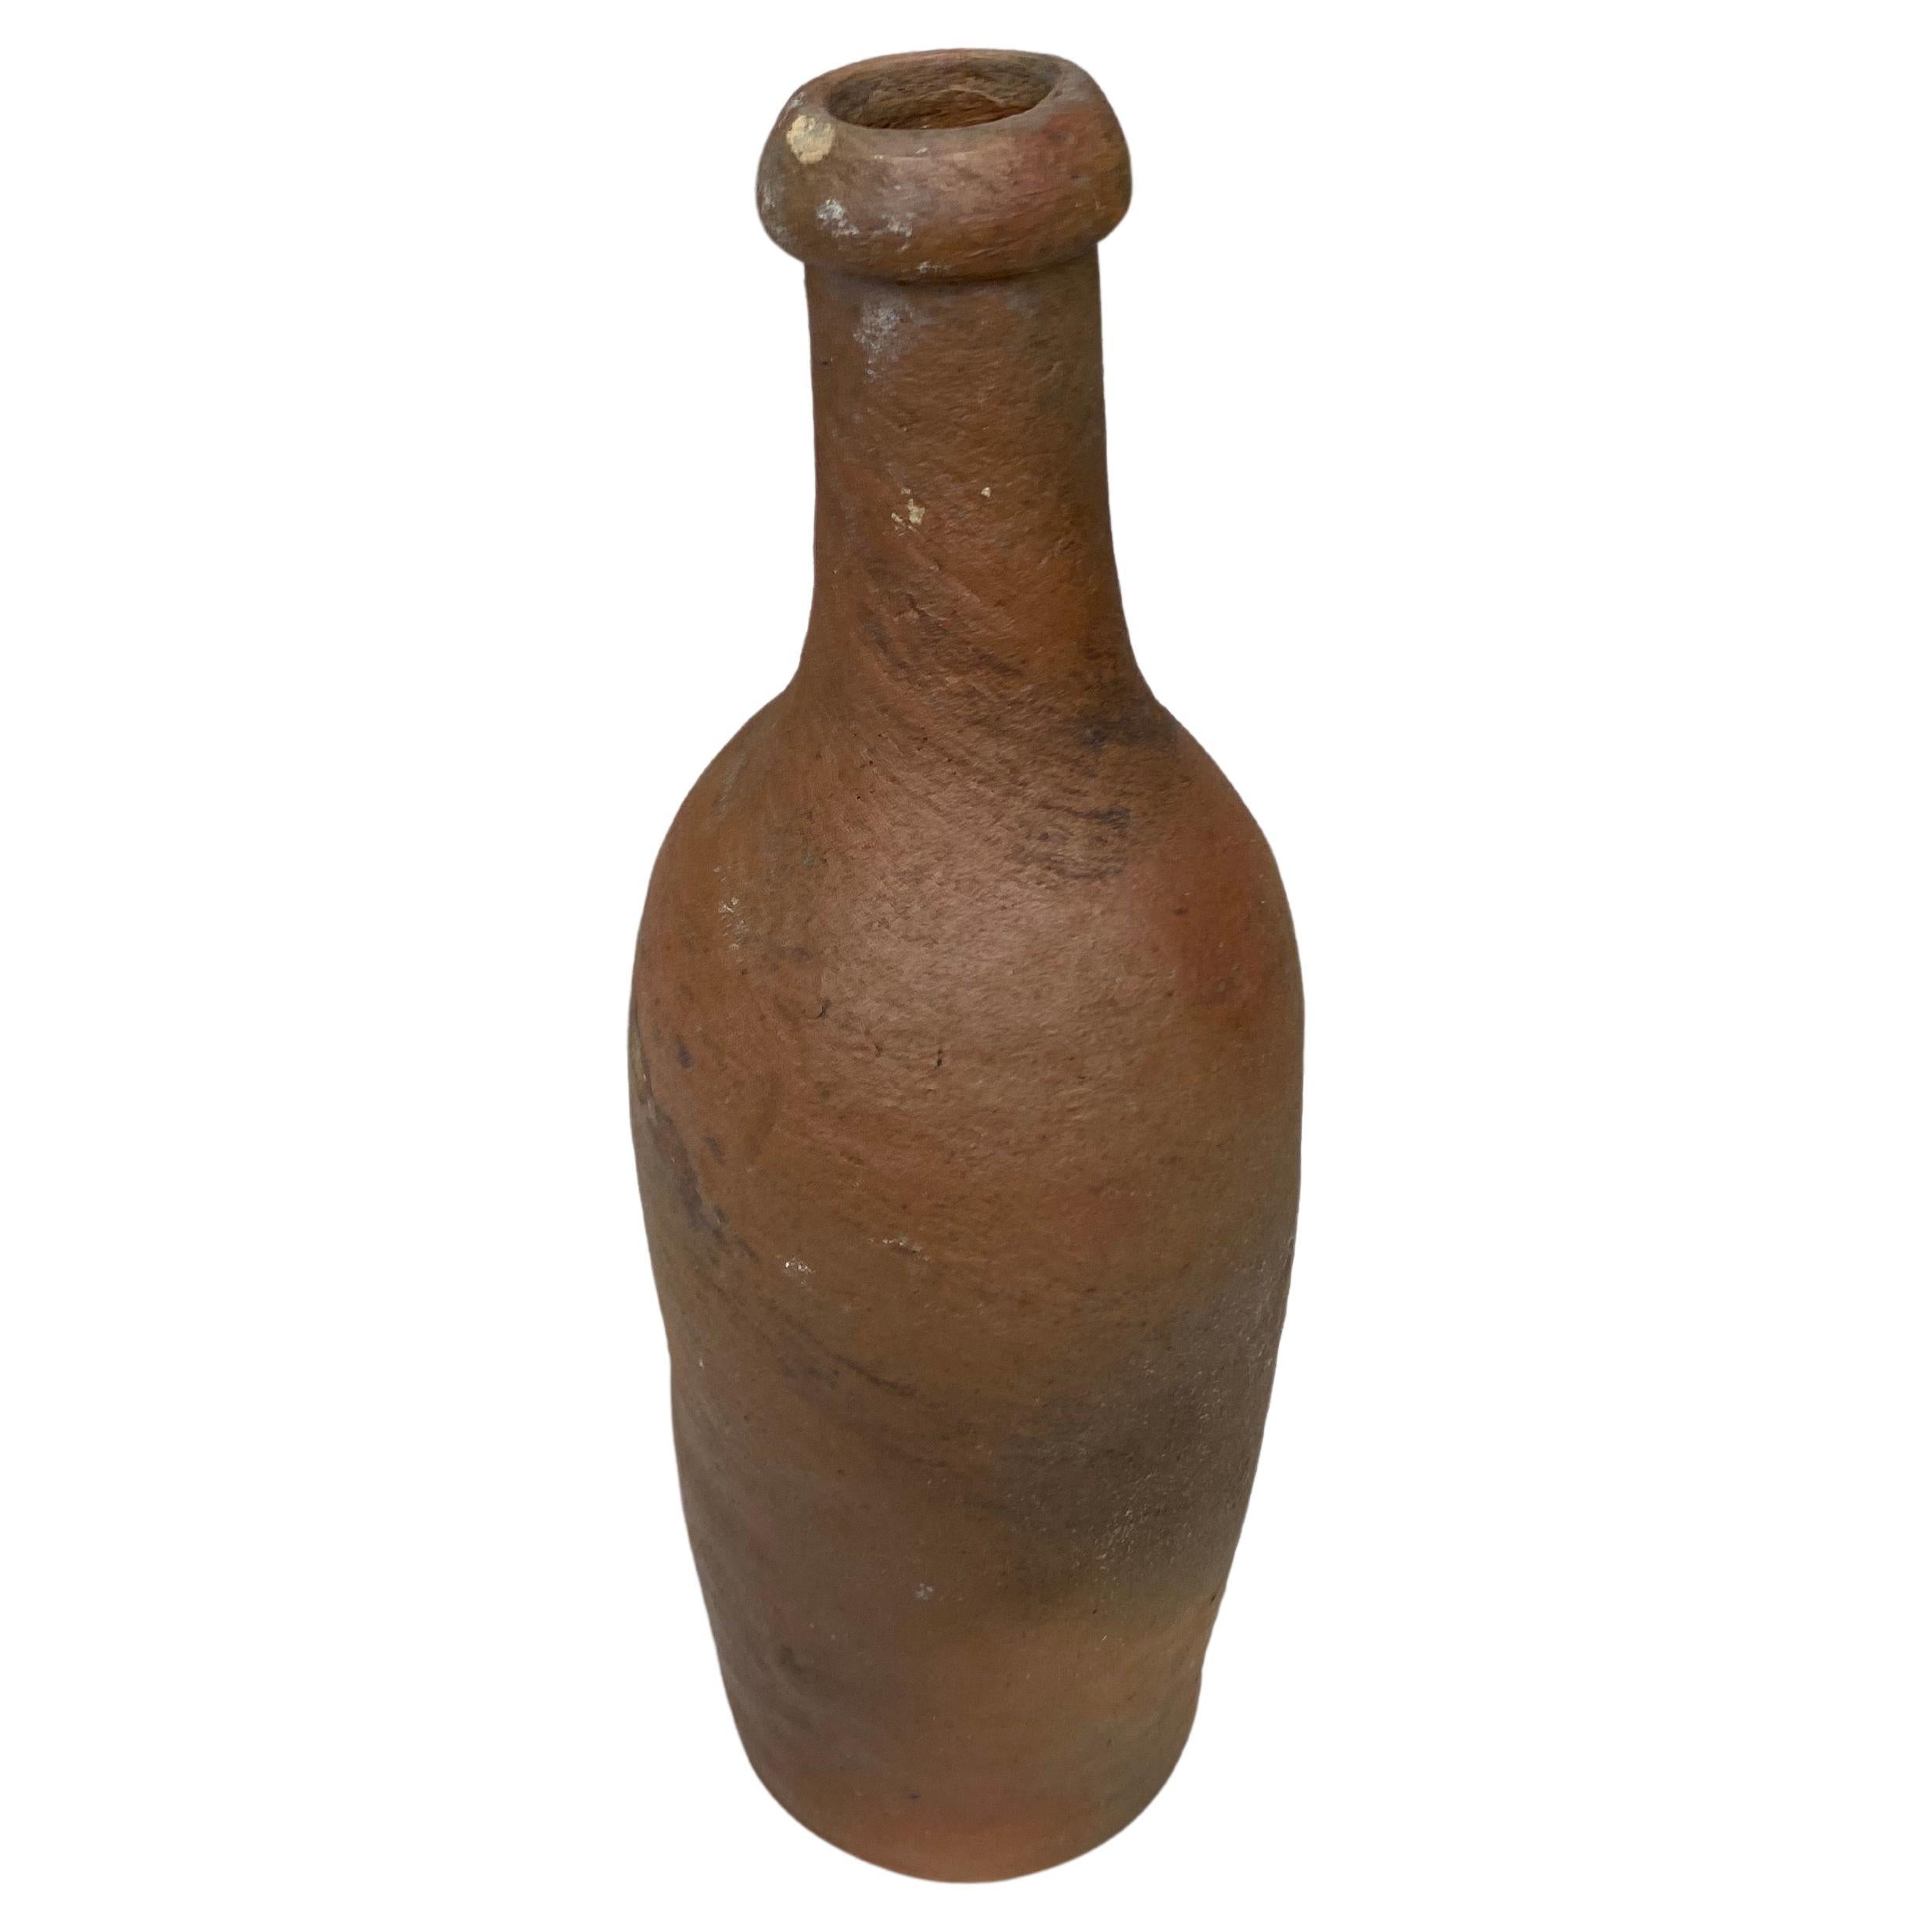 French pottery cider bottle from Normandy, end of 19th century.
13 Bottles available, sold separately.
Different sizes.